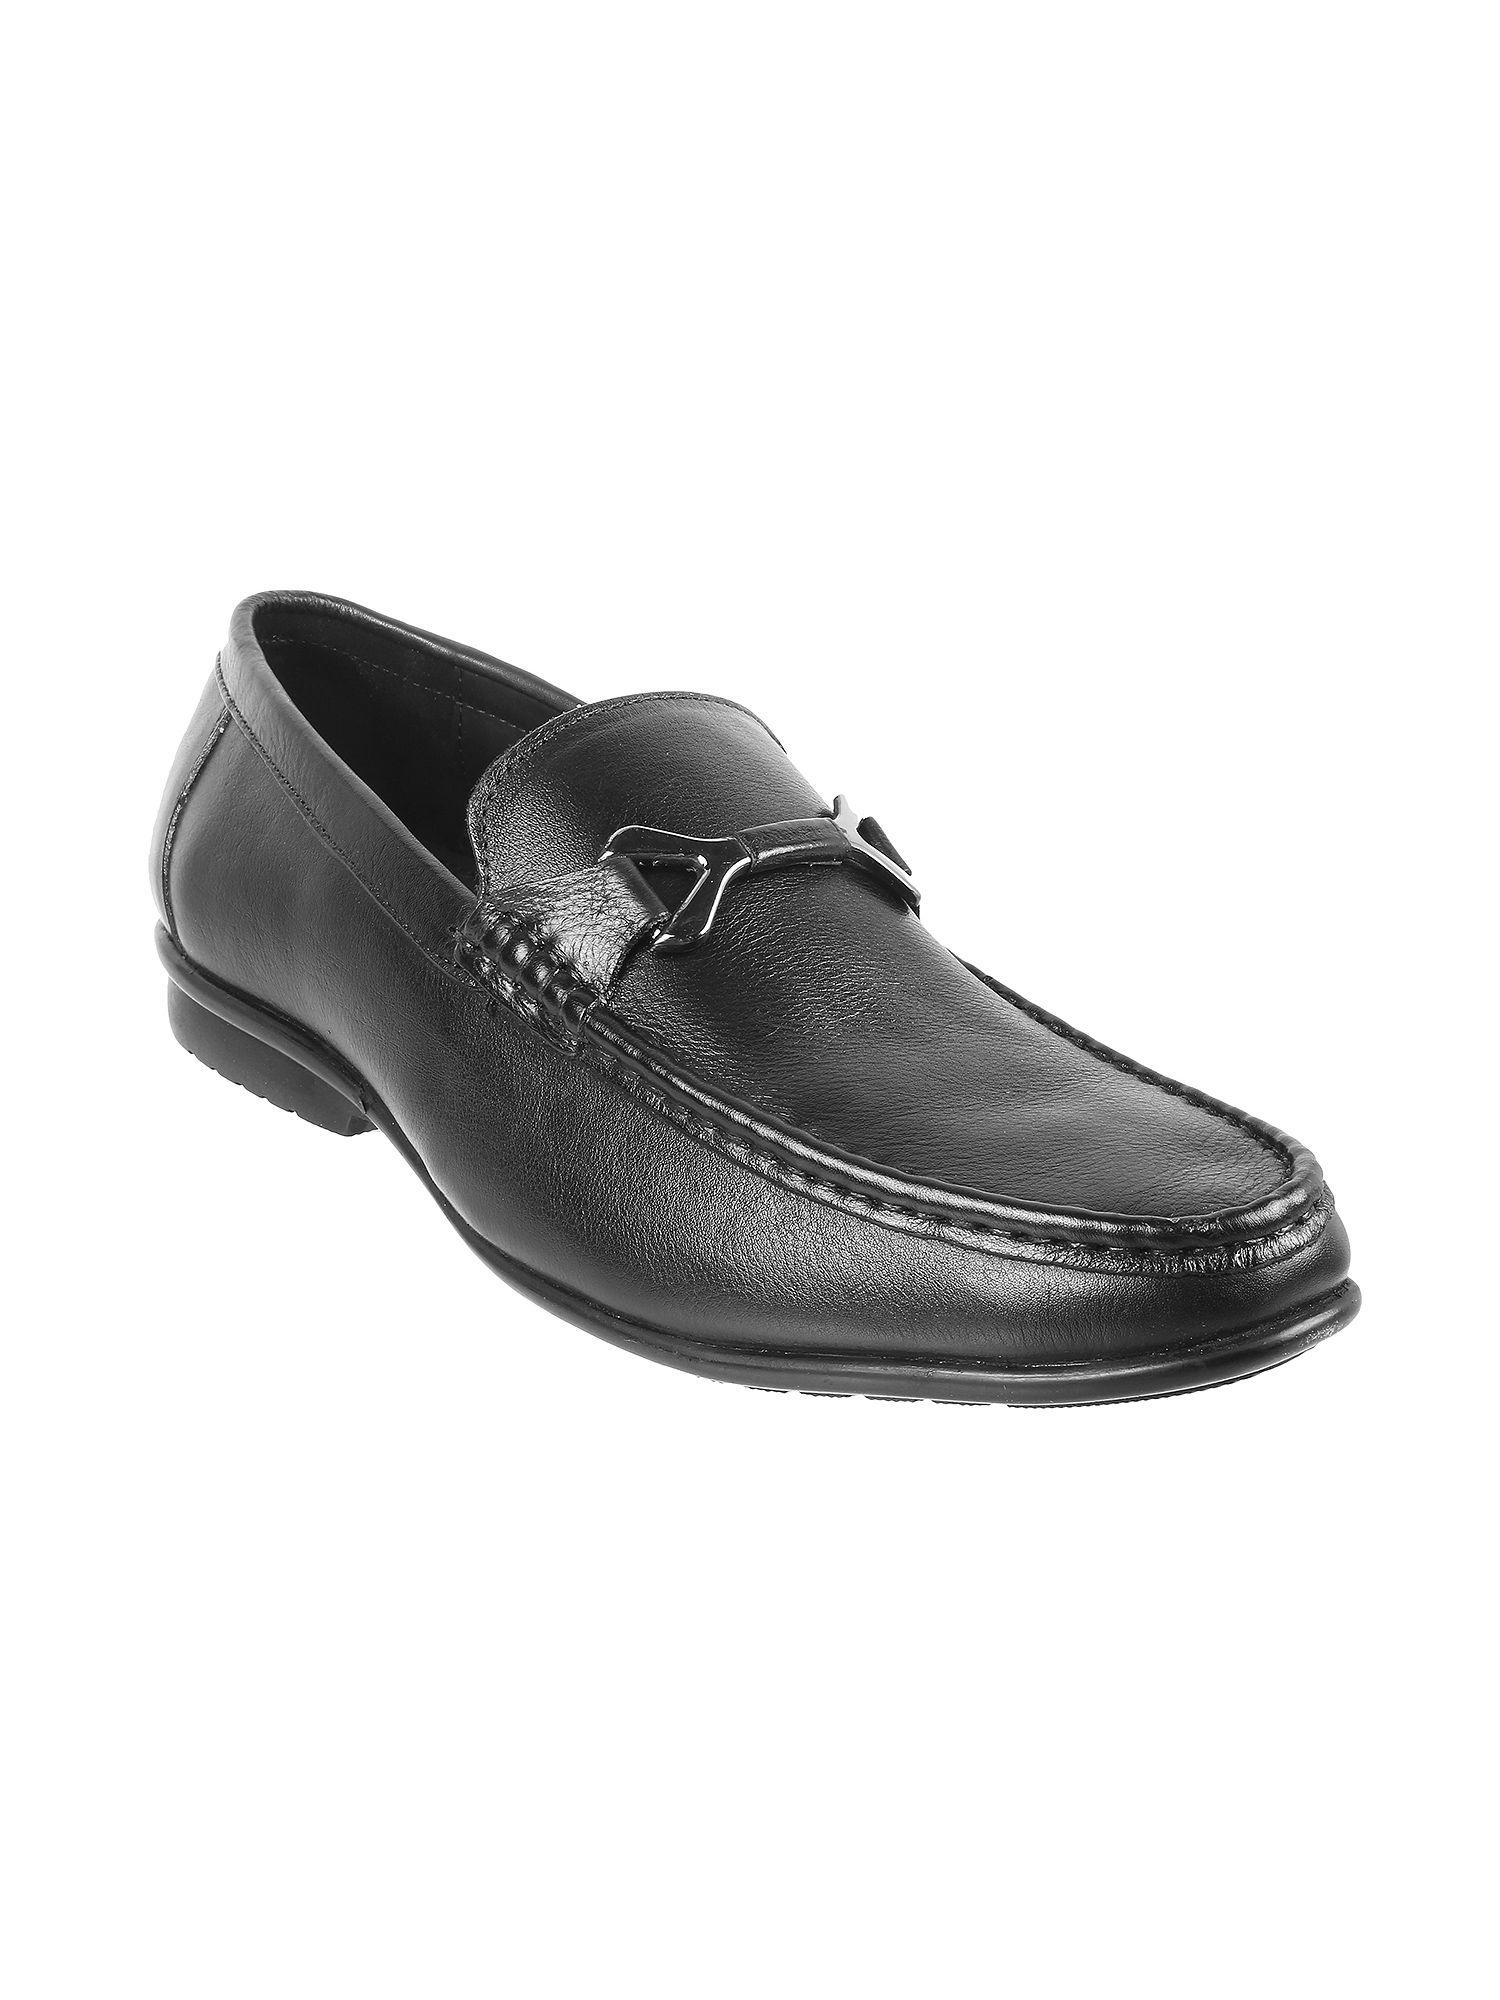 mens classic leather black moccasins